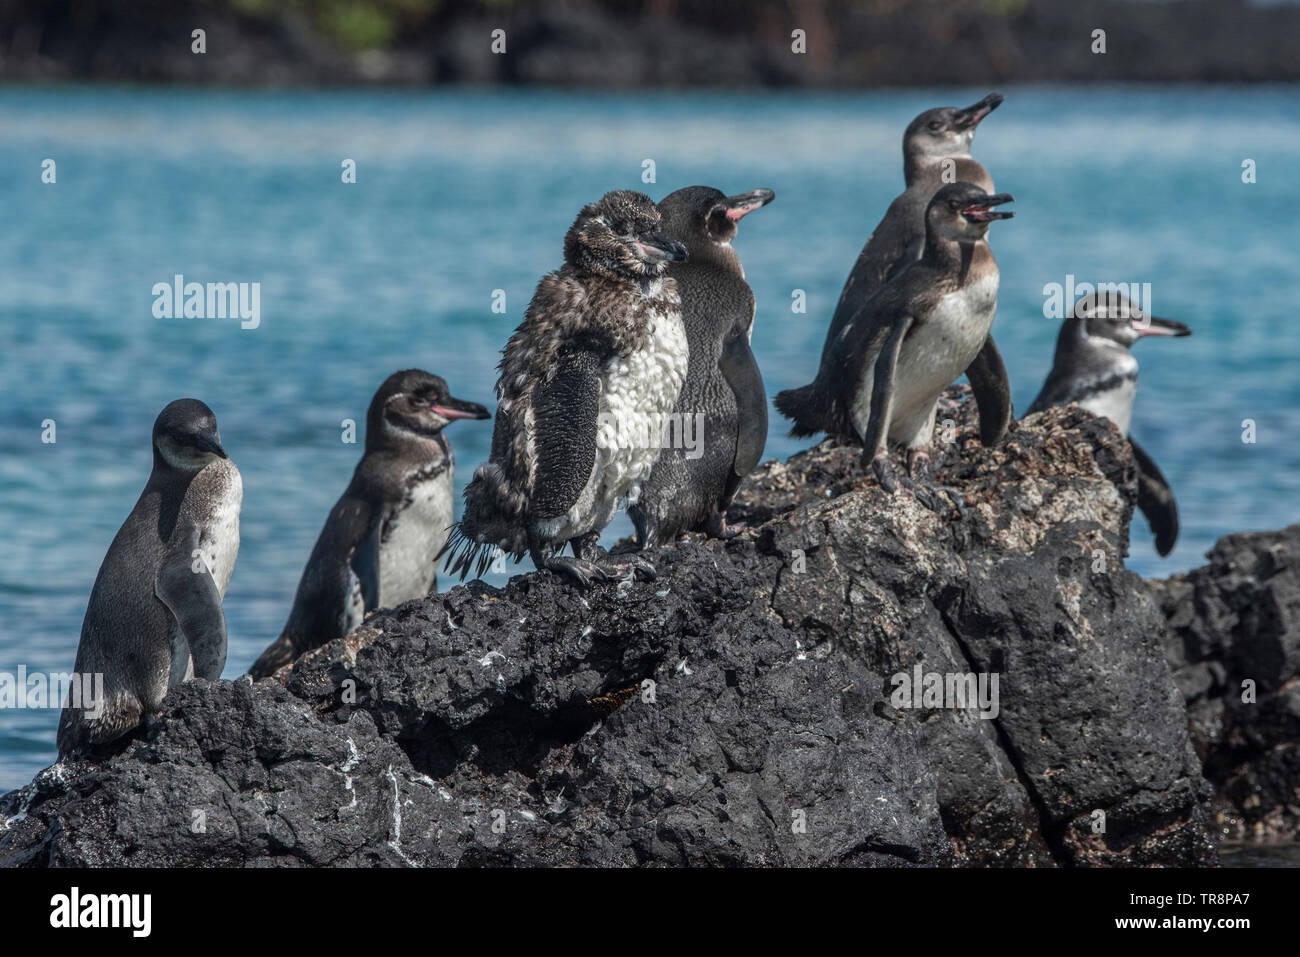 How can we help the galapagos penguin